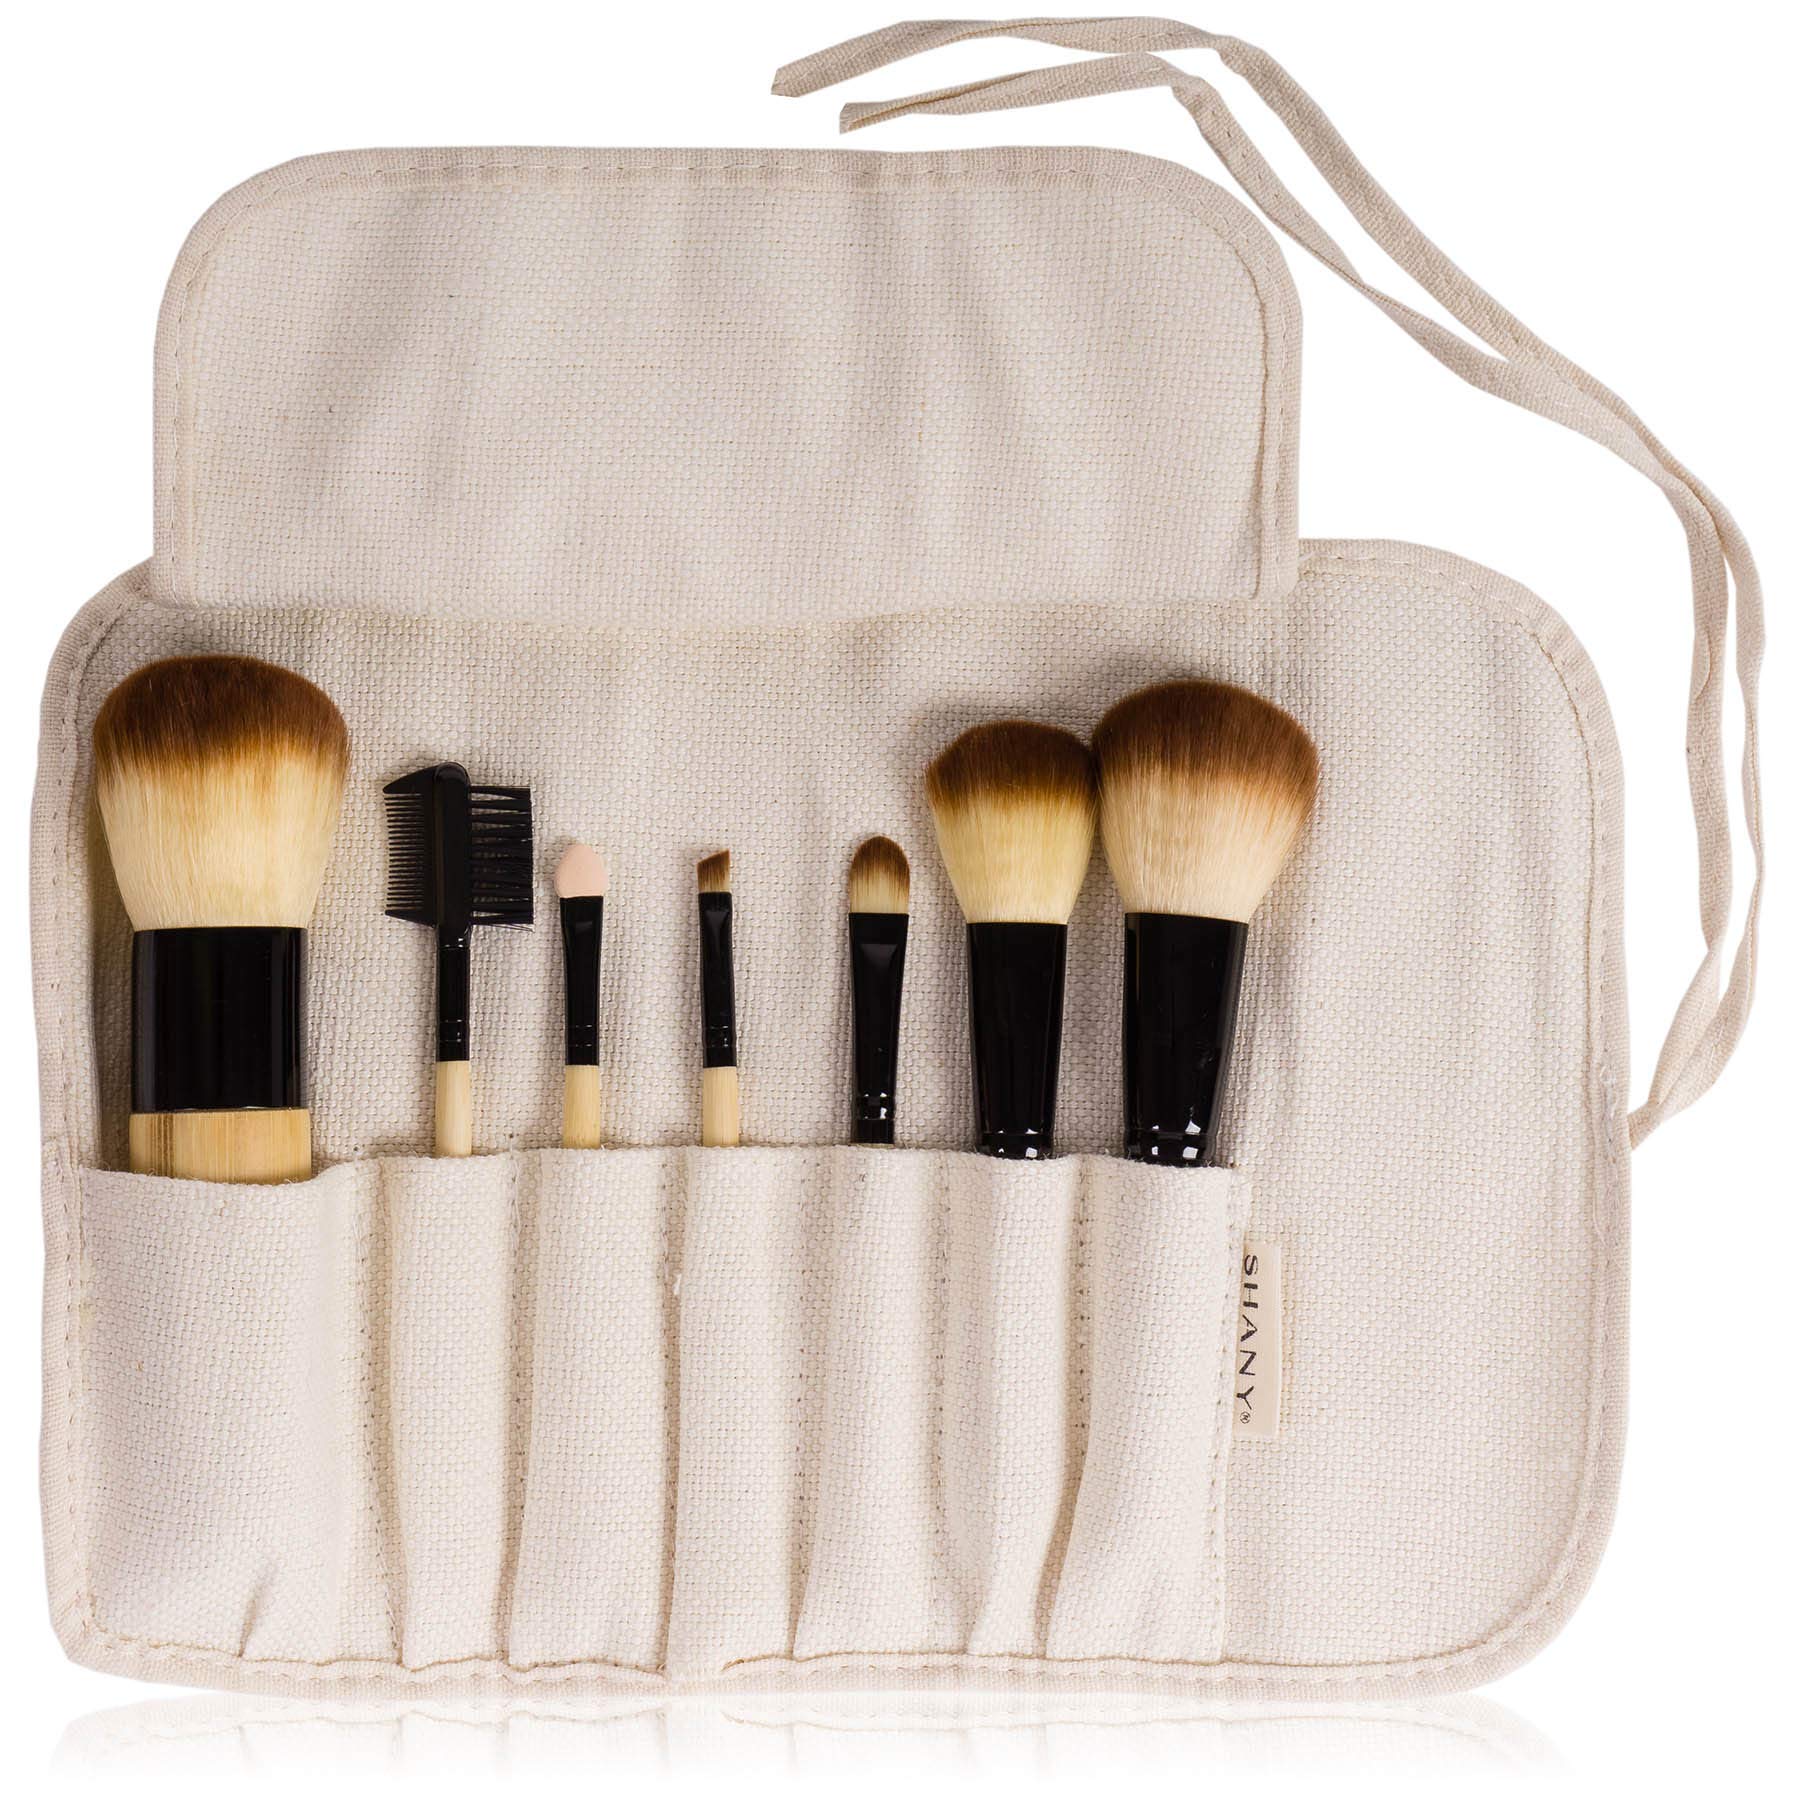 SHANY Bamboo Makeup Brush Set - Vegan Brushes With Premium Synthetic Hair & Cotton Pouch - 7pc